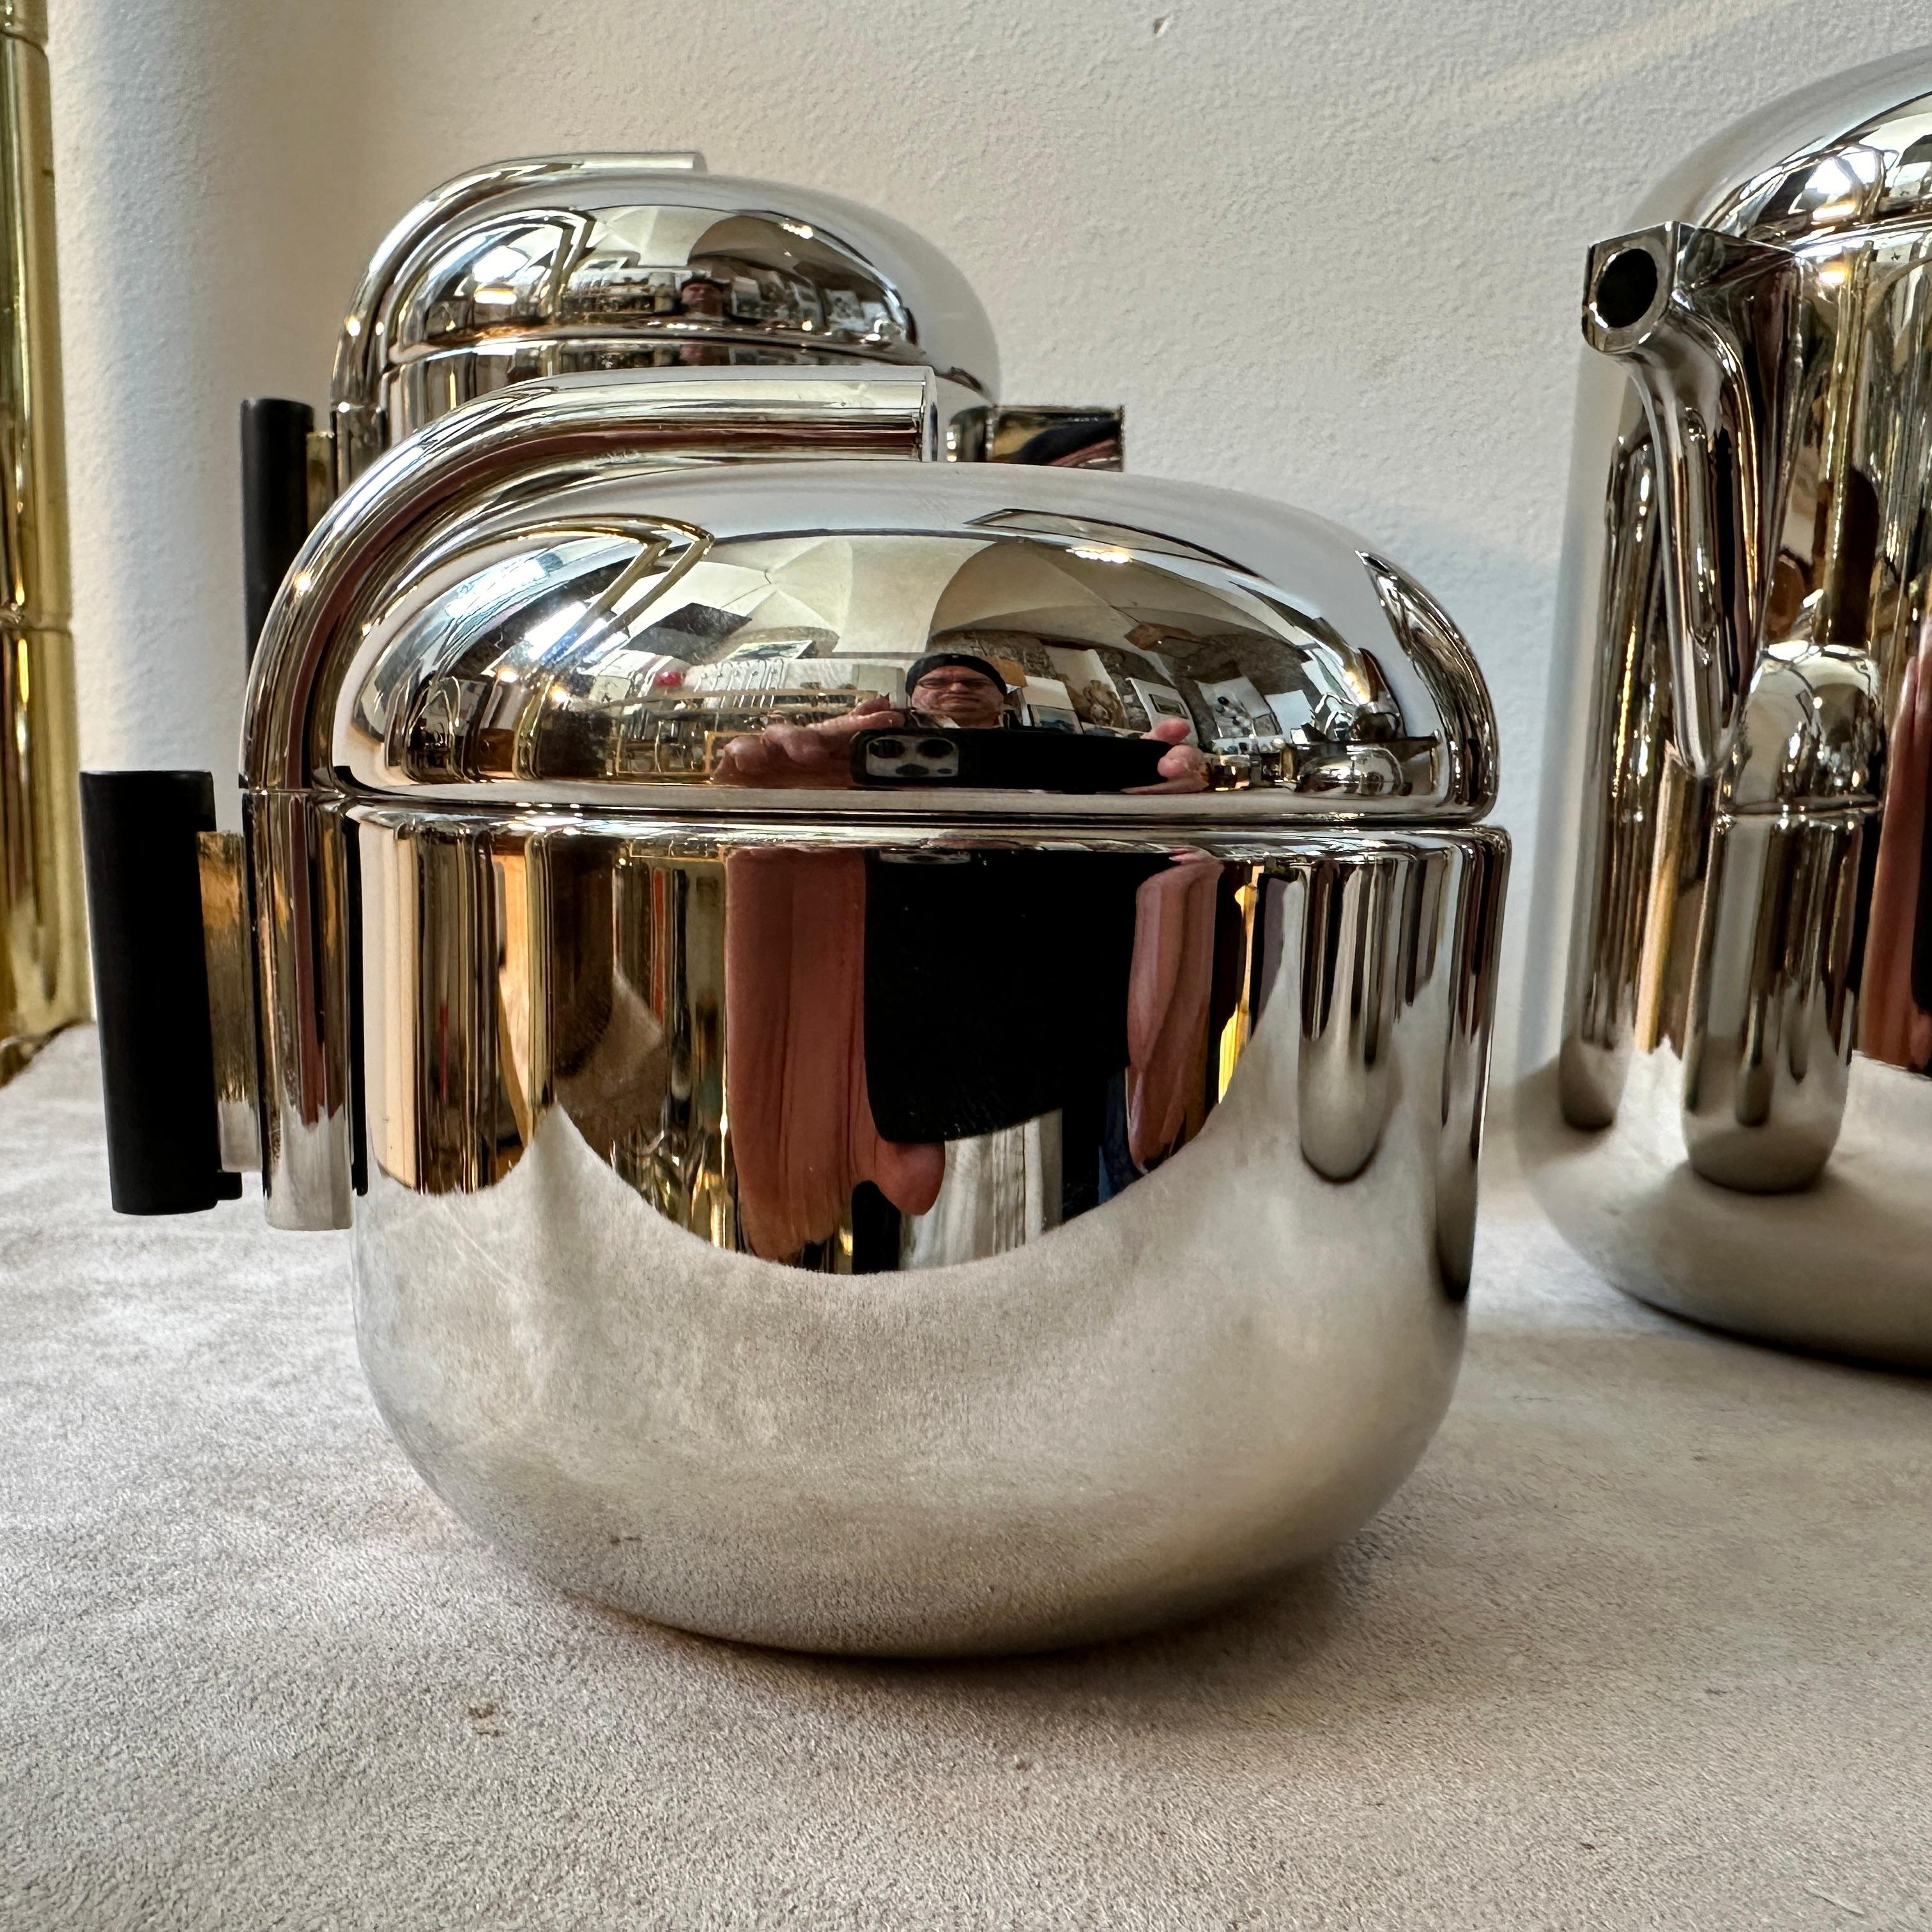 1960s Silver Plated Tea and Coffee Set Designed by G. Coarezza for Mam Milano For Sale 10